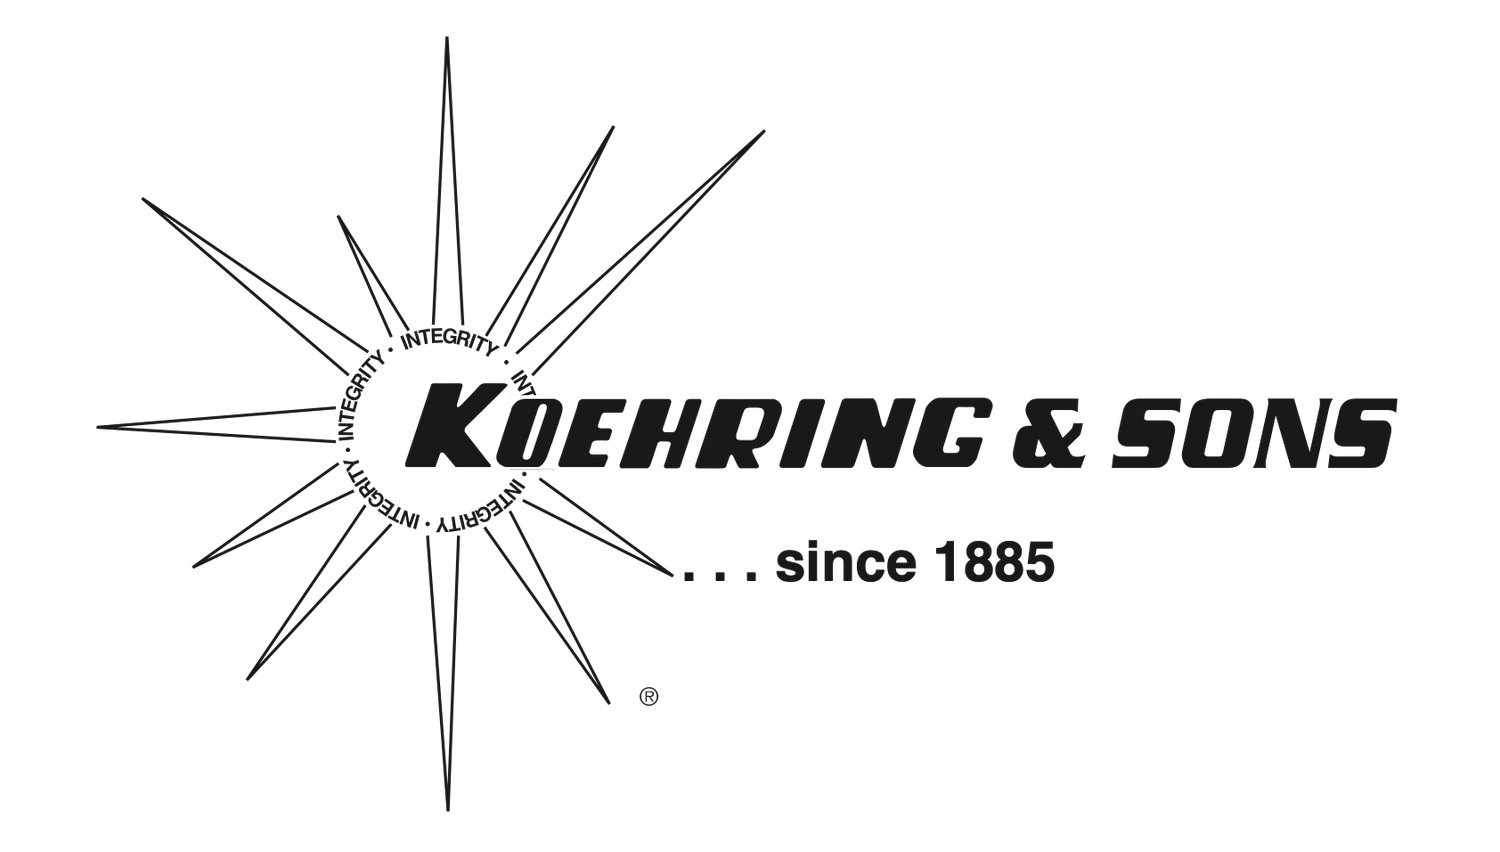 Koehring & Sons